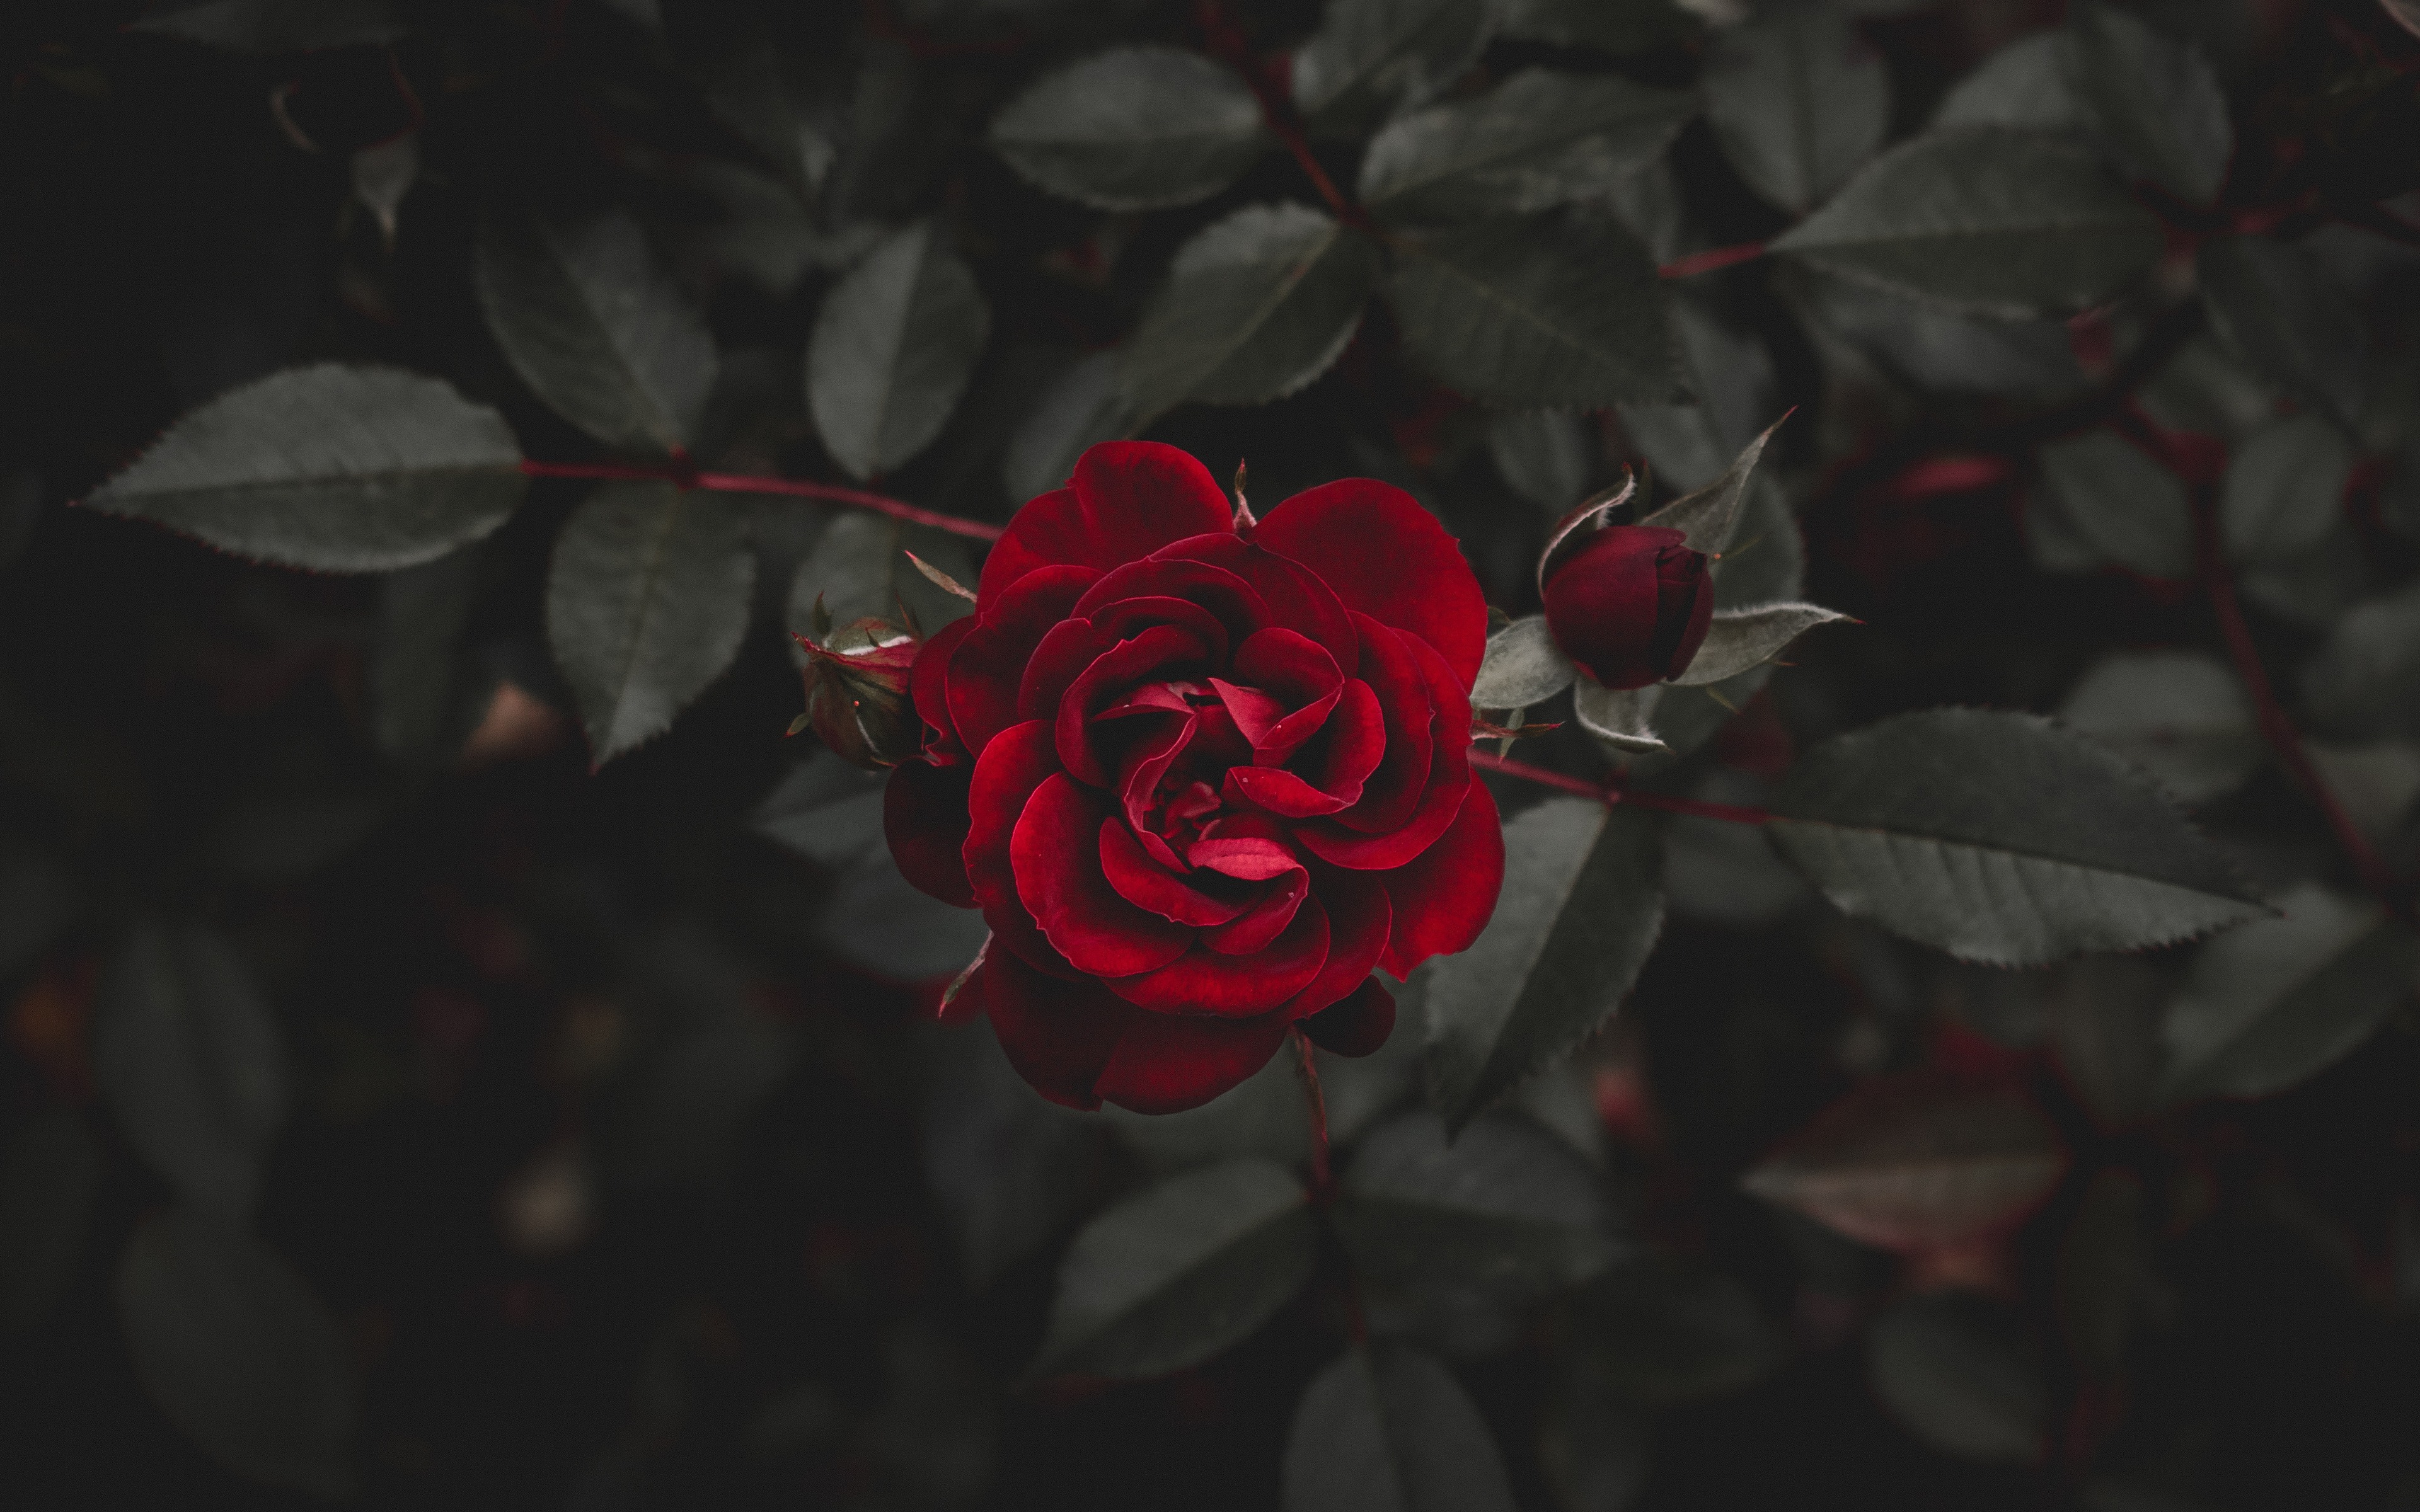 Red Roses Are Beauty 4k Ultra Hd Wallpaper Hintergrund 3840x2400 Wallpaper Abyss